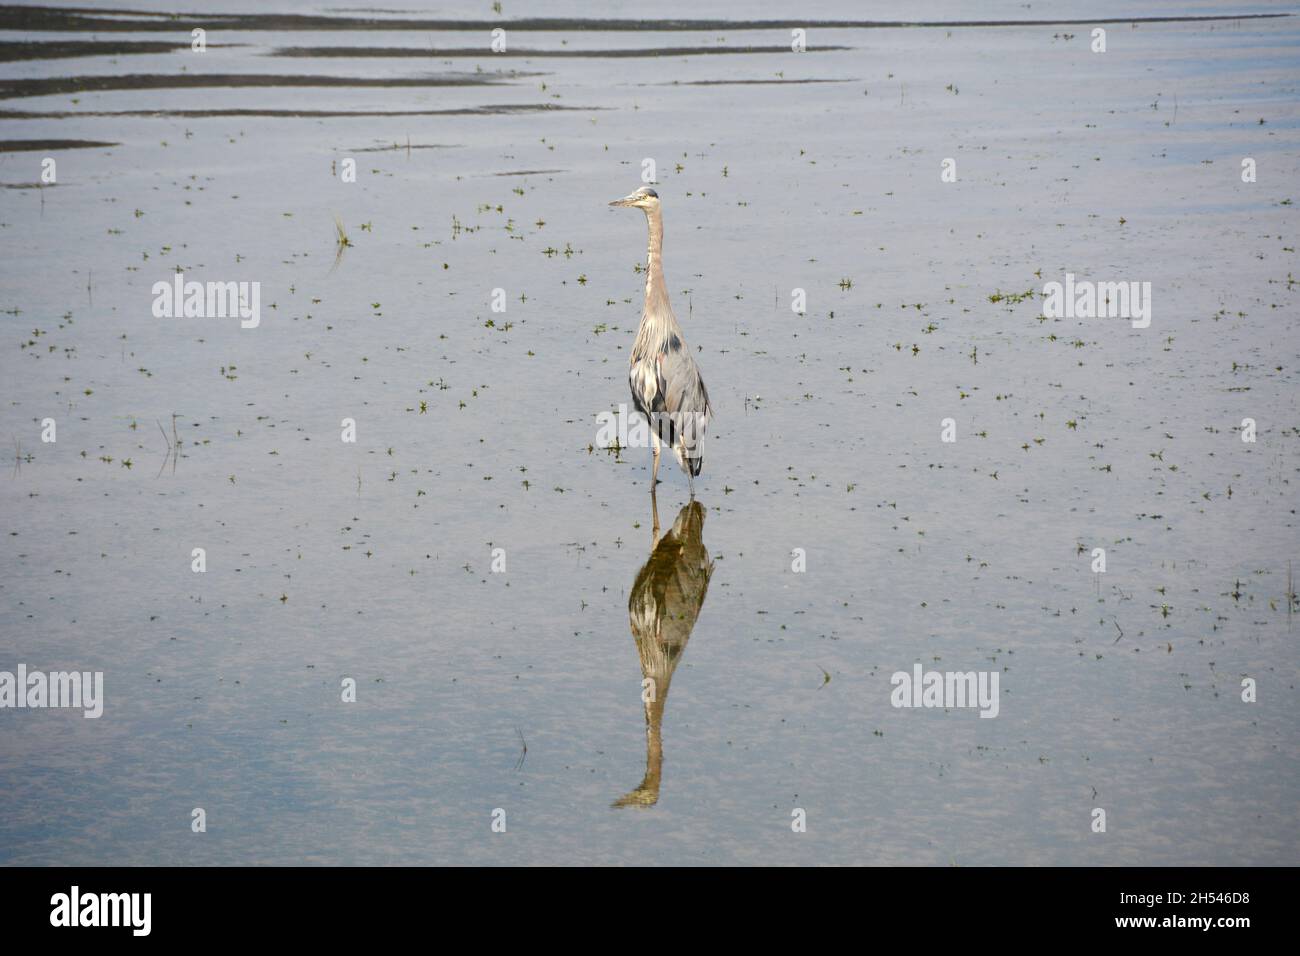 A great blue heron standing in the water near the shores of Pitt Lake, a natural bird sanctuary, near Pitt Meadows, British Columbia, Canada. Stock Photo